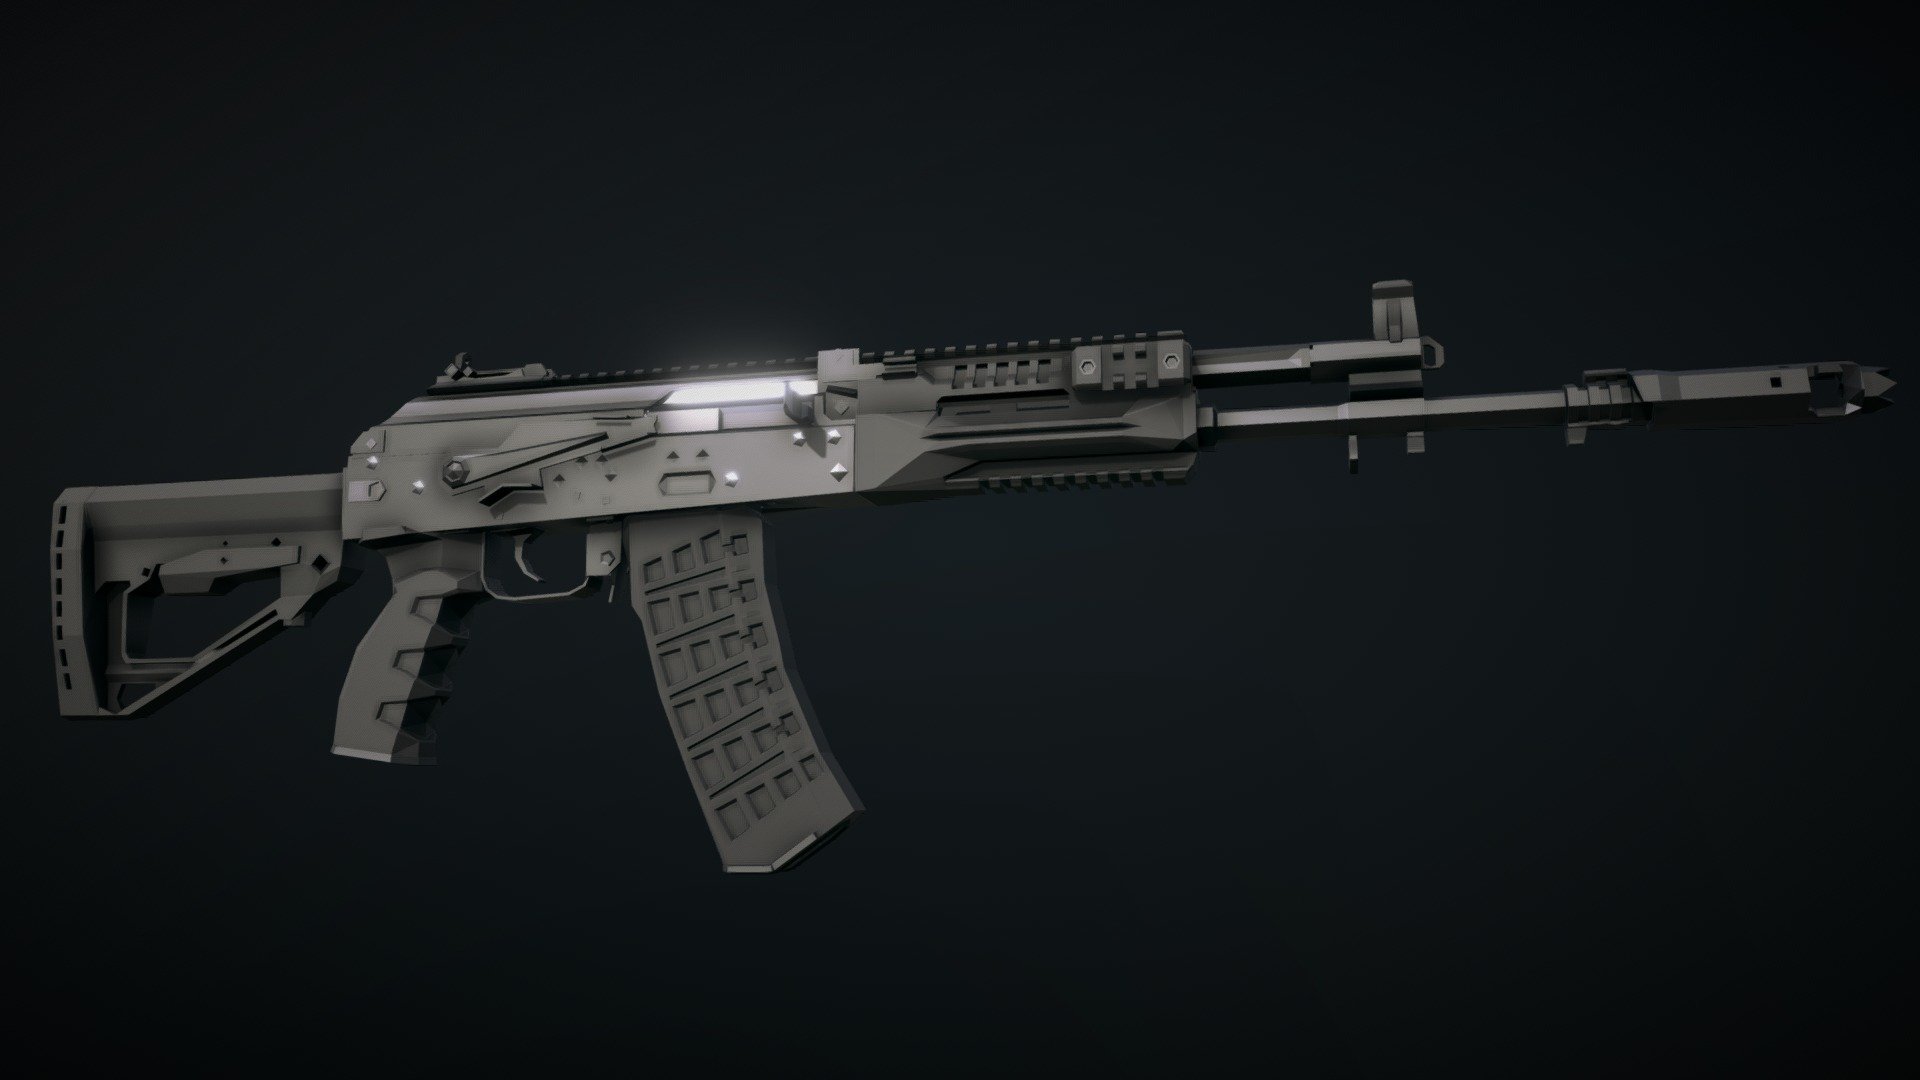 Low-Poly model of the 2016 adoption variant of the AK-12 rifle. This is the latest generation of the AK rifle, with attachment rails, a foldable and adjustable stock, a new rear sight, and a quick detachable muzzle device system. At least in theory, this should be a vast improvement over previous generations. however, this weapon, in reality, is a significant step backwards compared to previous rifles like the AK-74m and AK-200, and is far worse than the original 2012 AK-12 prototype, which had multiple interesting and revolutionary concepts, almost none of which were kept for this variant of the rifle 3d model